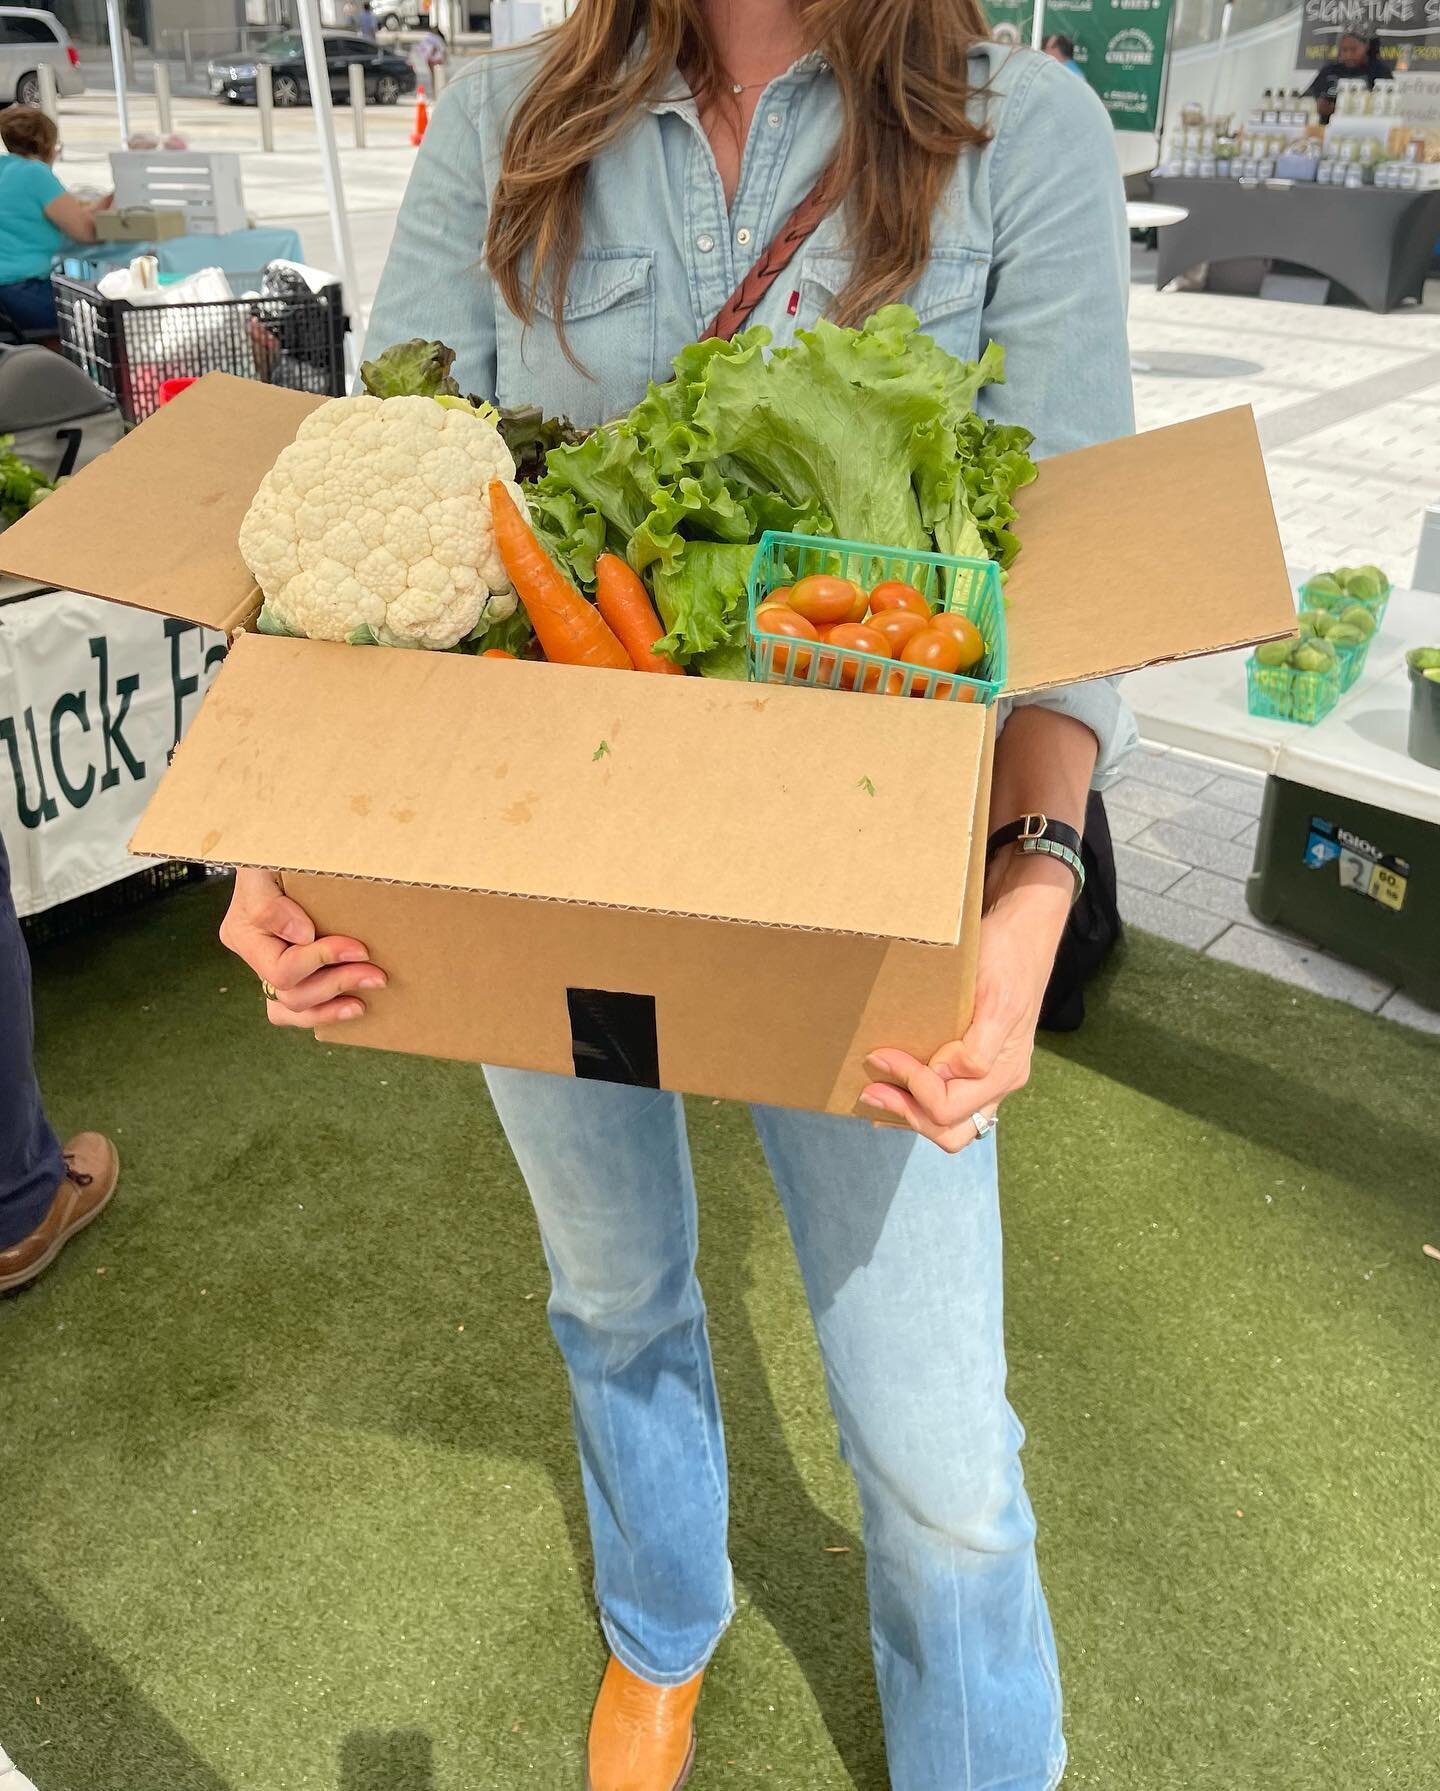 Did you know at our Downtown farmers markets, you can build your own produce box from @wood_duck_farm for just $40?? This will allow you to pick exactly what you want for your home. 

Come out TODAY to Smith St. Farmers Market from 10:30-1:30 {1200 S